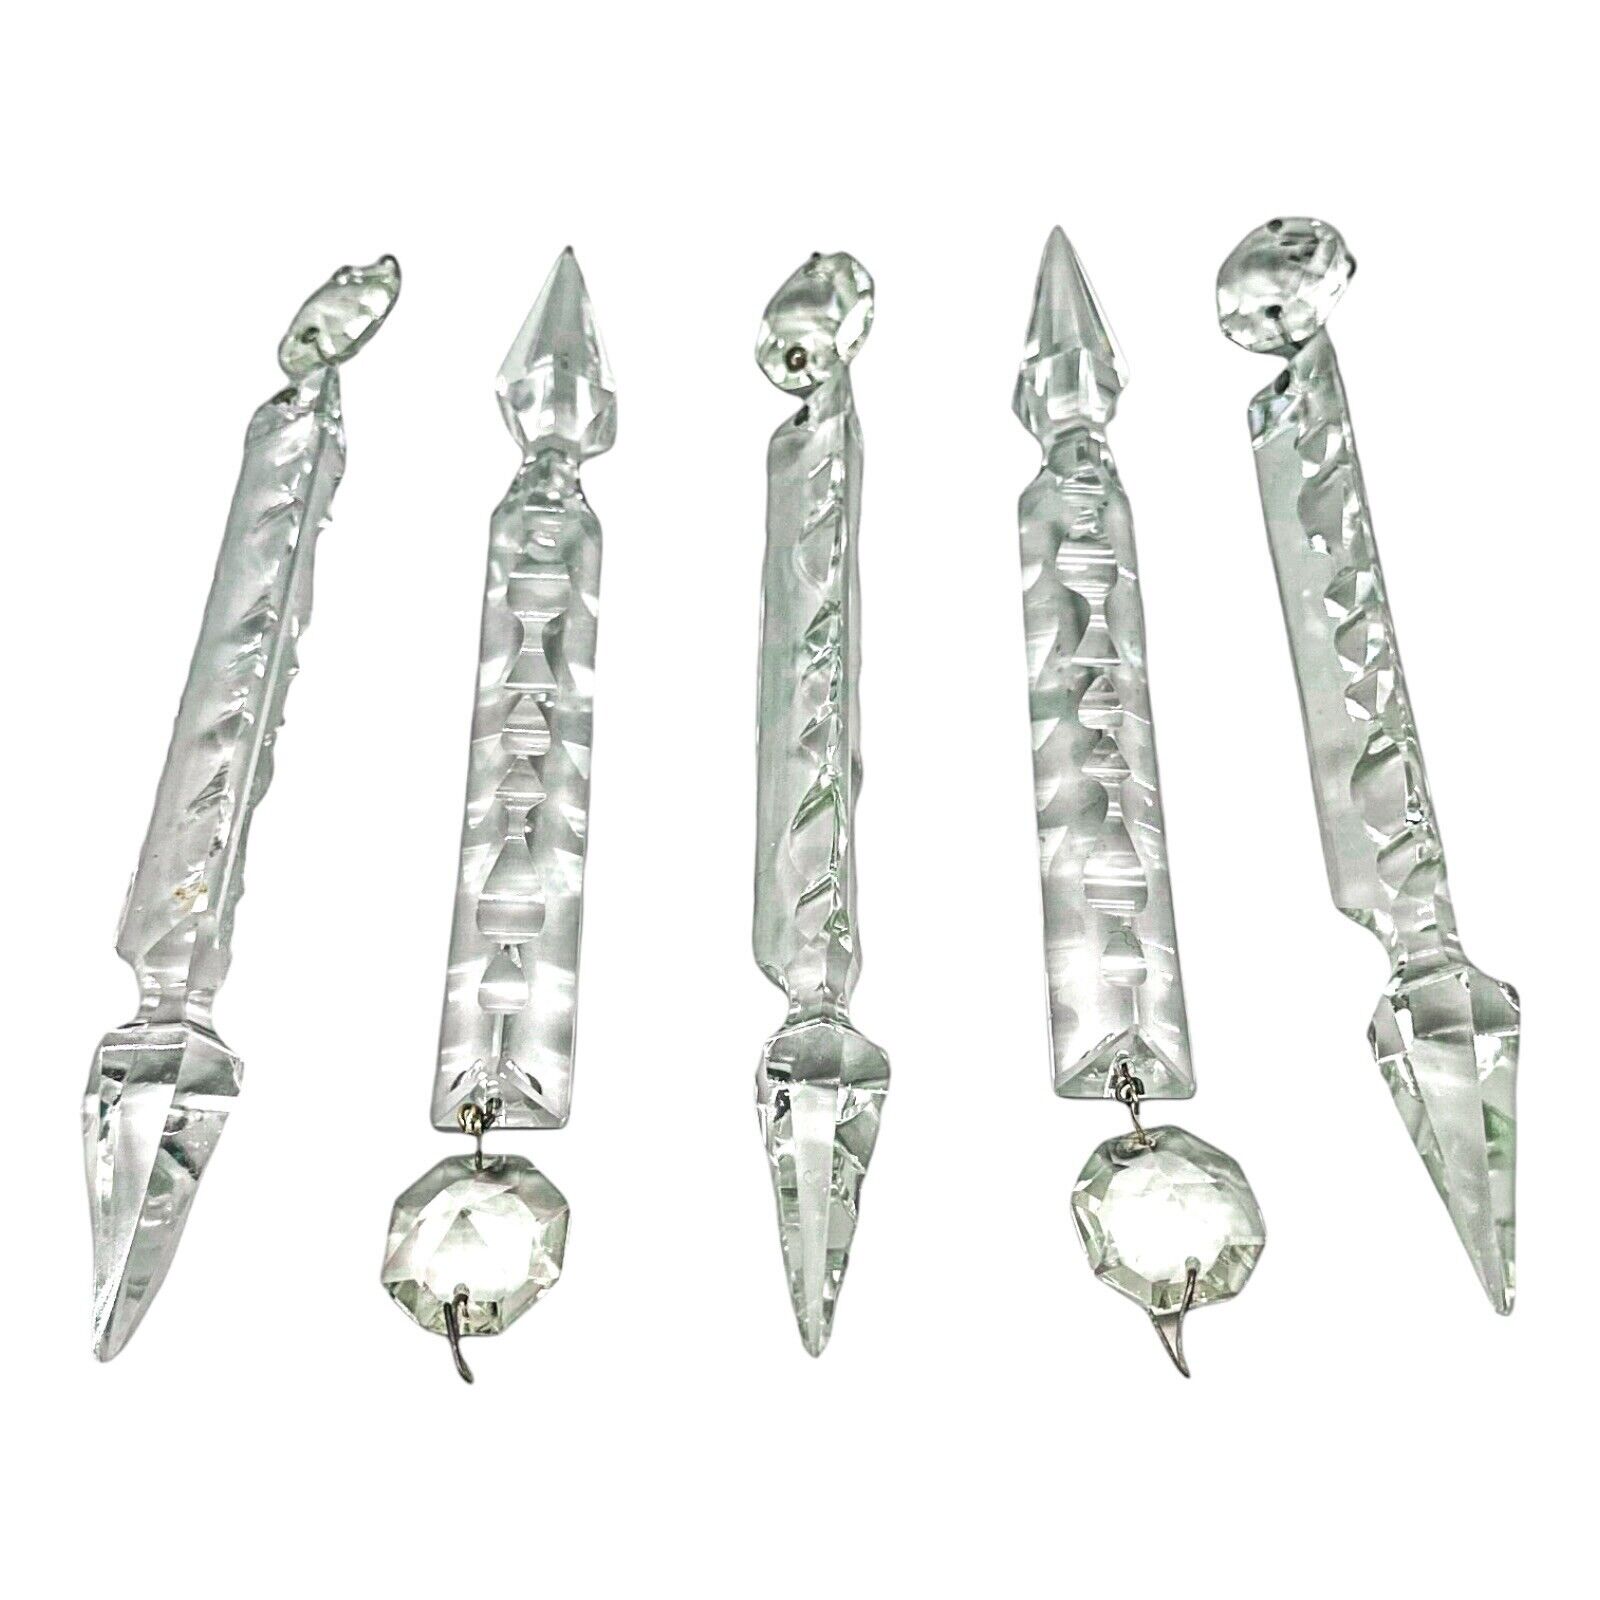 Antique French Cut Crystal Chandelier, Mantle Luster Spearhead Prisms Lot Of 5